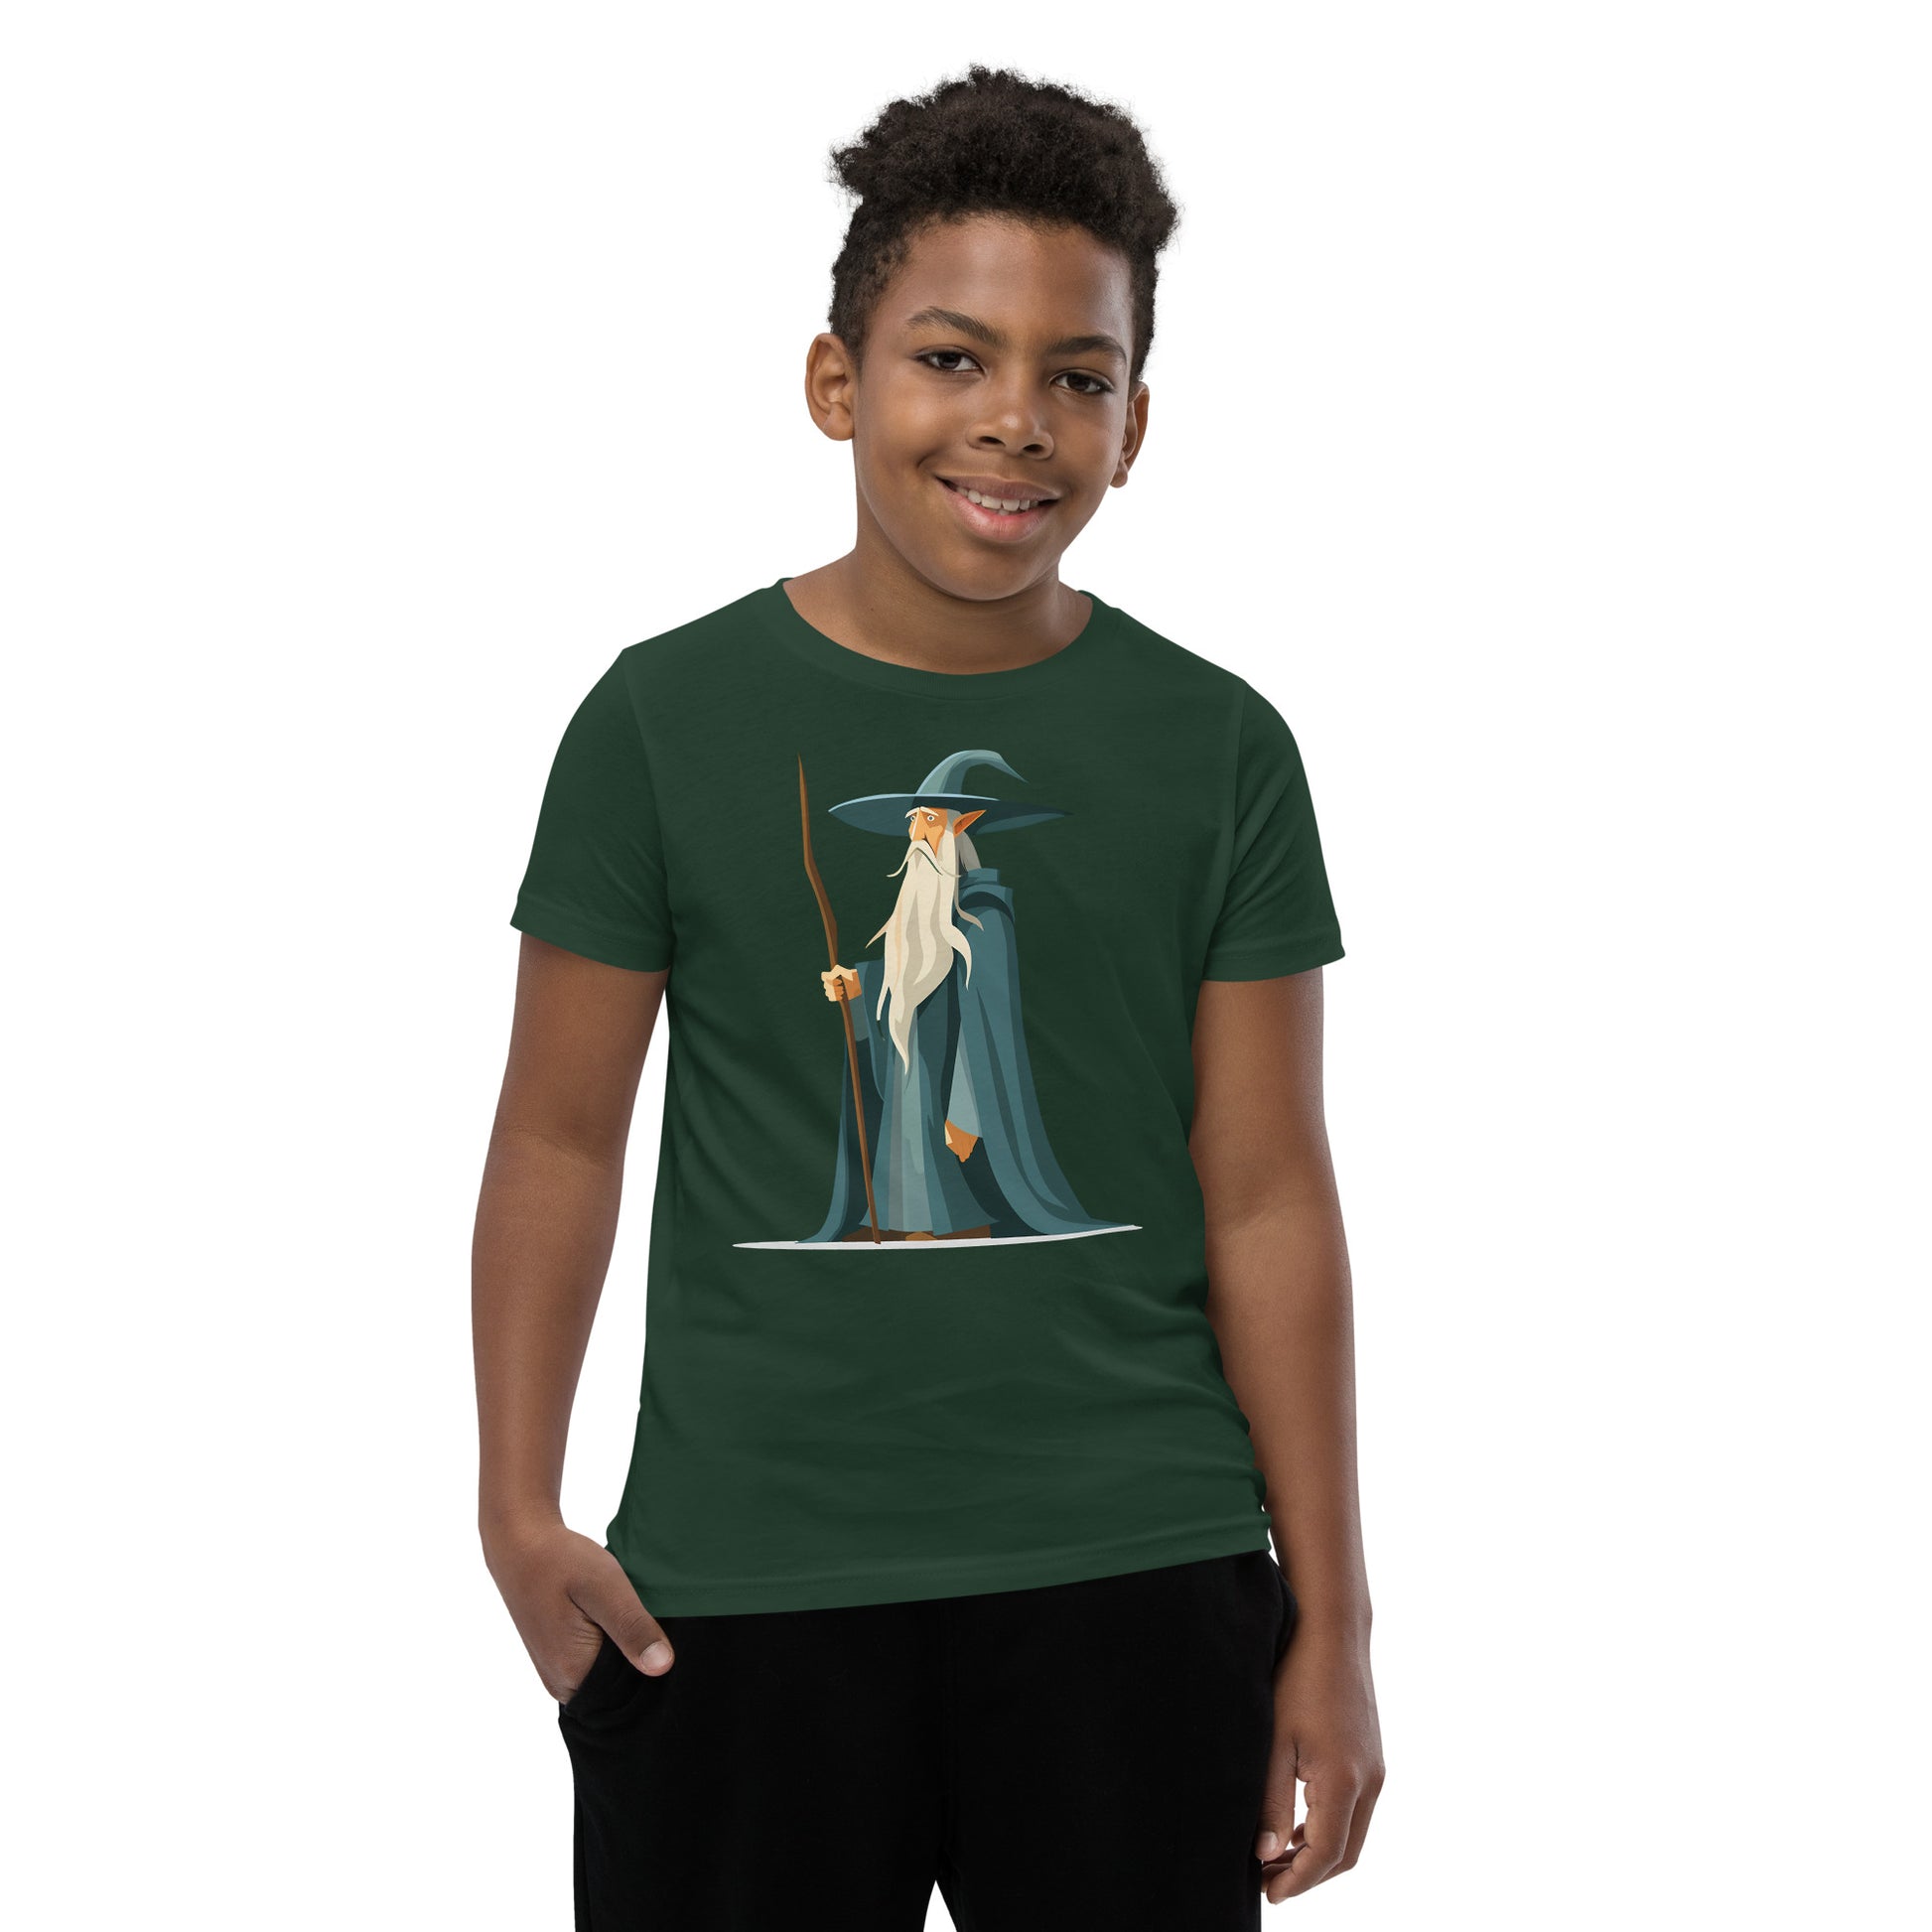 Boy with a forest green T-shirt with a picture of a magician